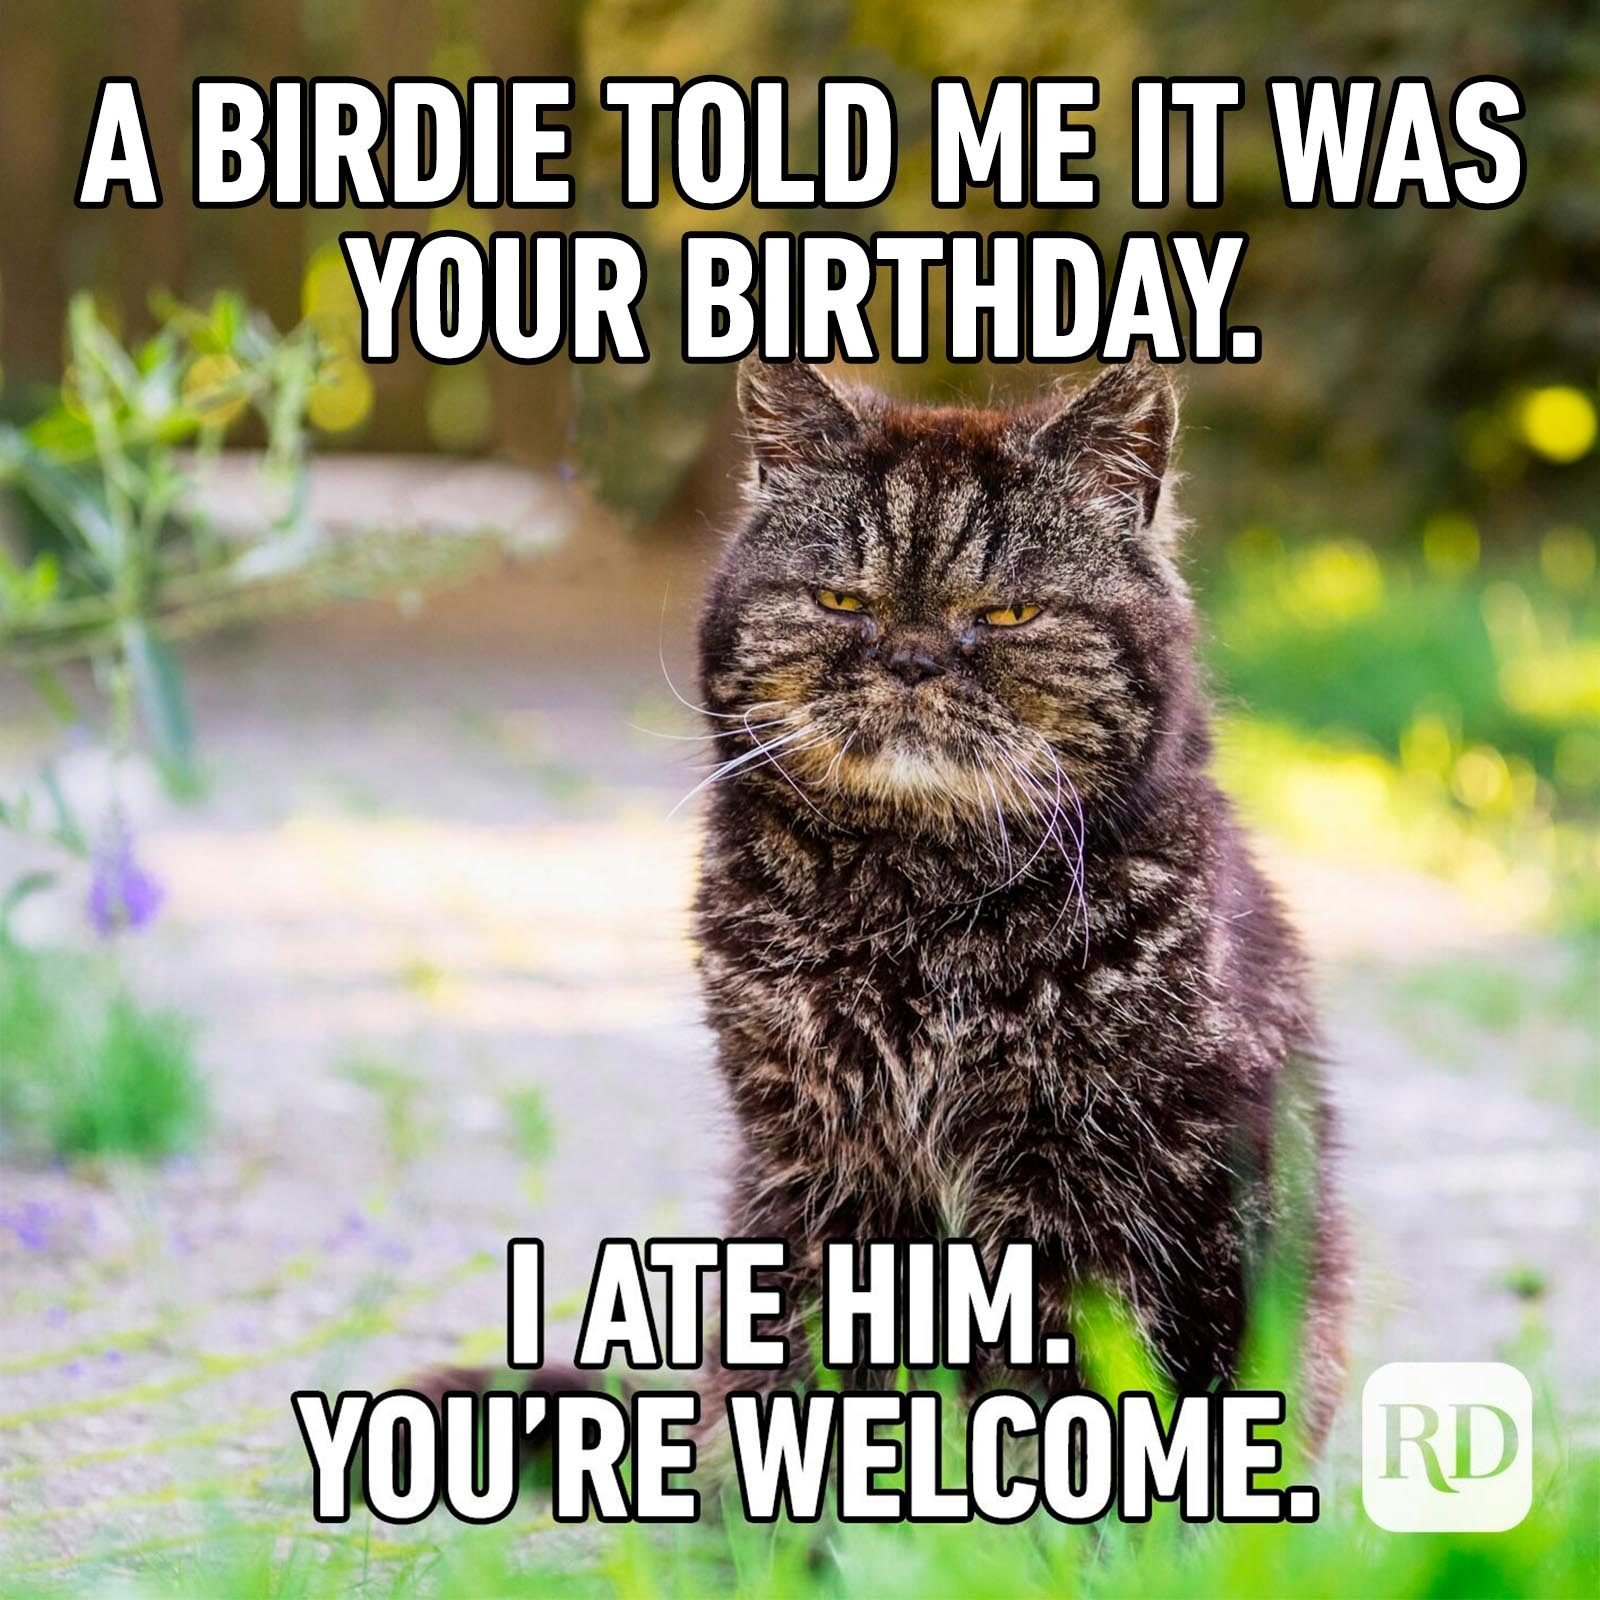 52 Funny Birthday Memes That Will Make Anyone Smile on Their Big Day